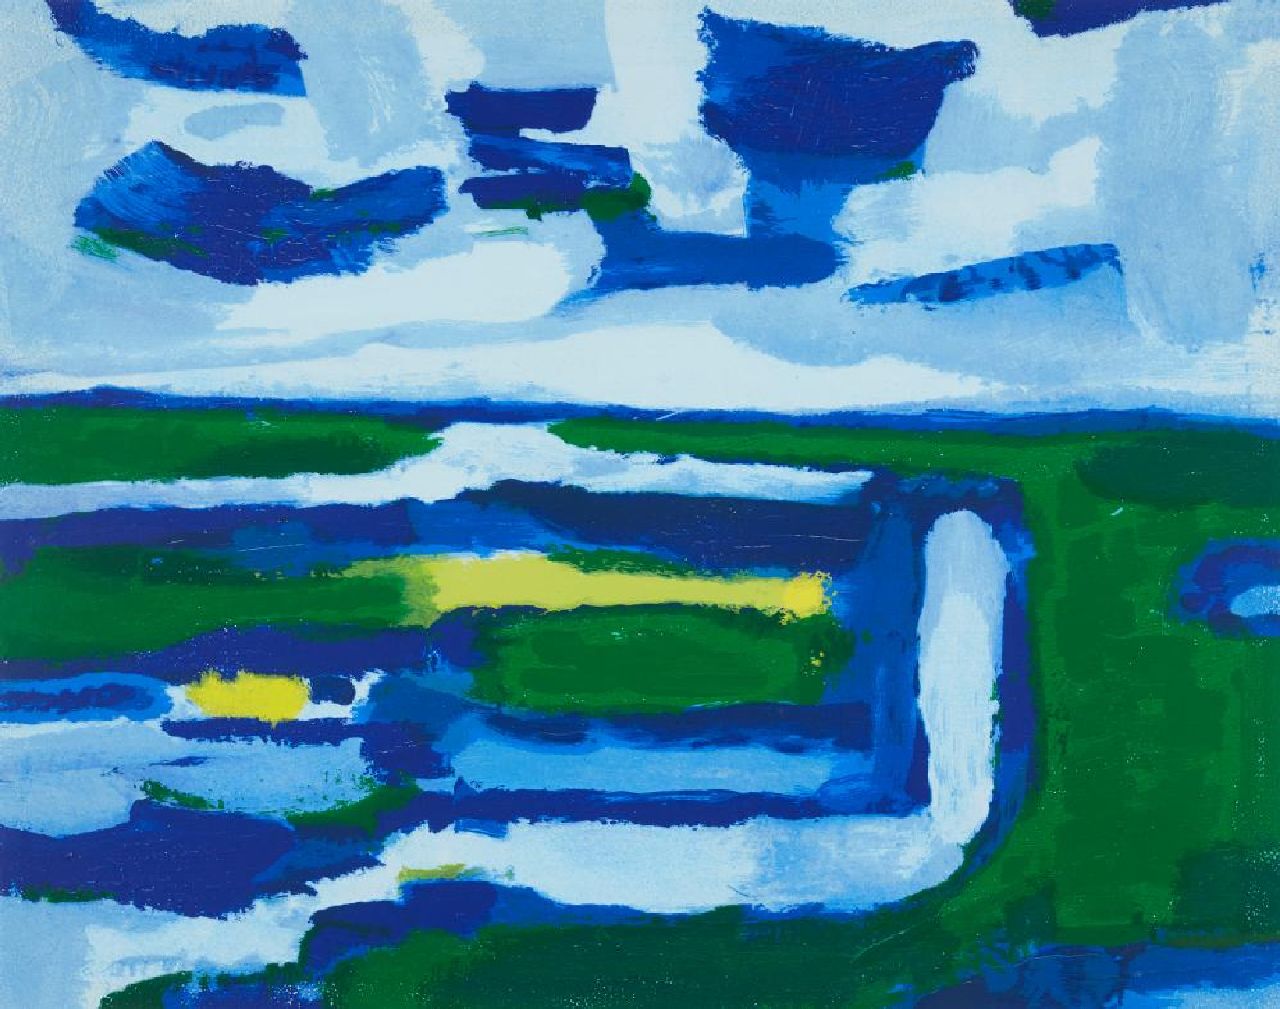 Benner G.  | Gerrit Benner, Landscape in Friesland, screenprint 41.8 x 52.8 cm, signed l.r. (in pencil) and executed ca. 1980